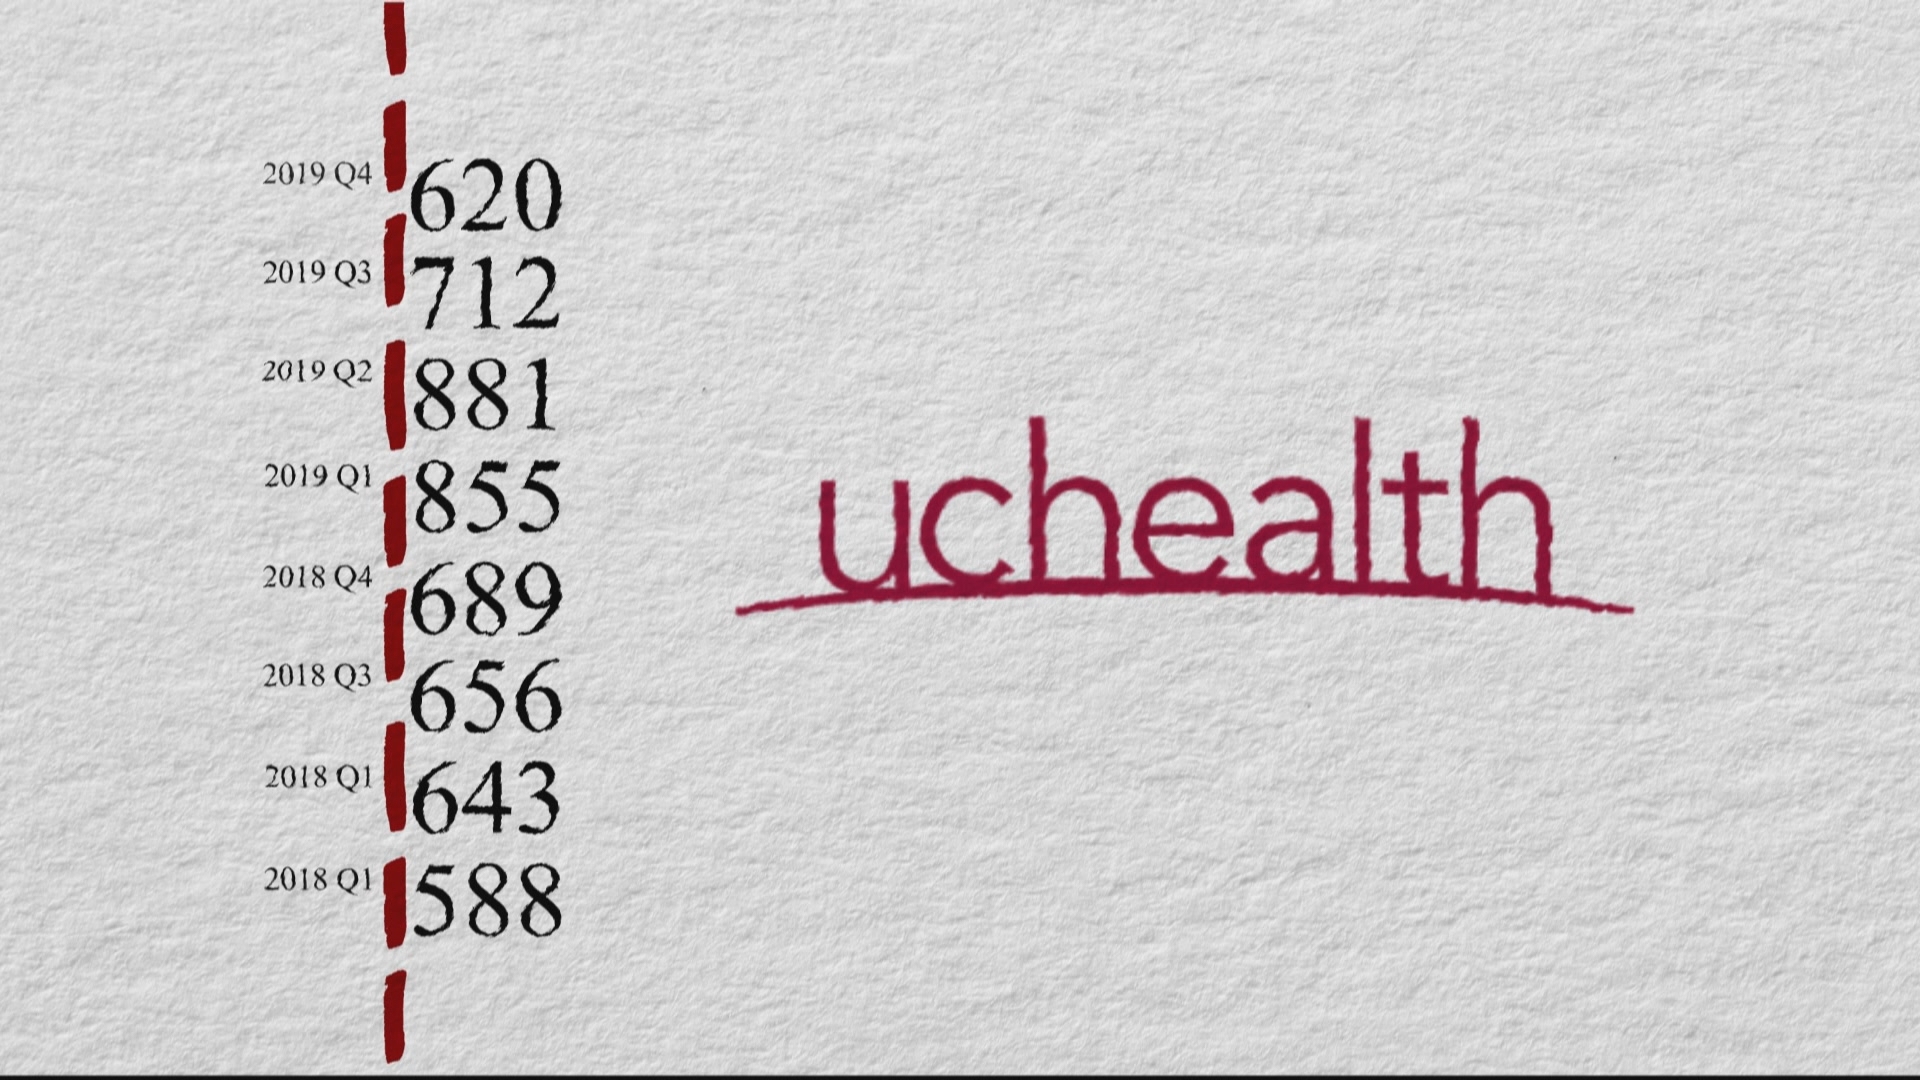 An investigation discovered UCHealth used what amounted to a loophole in the state’s court system for years to keep private its aggressive bill collection practices.